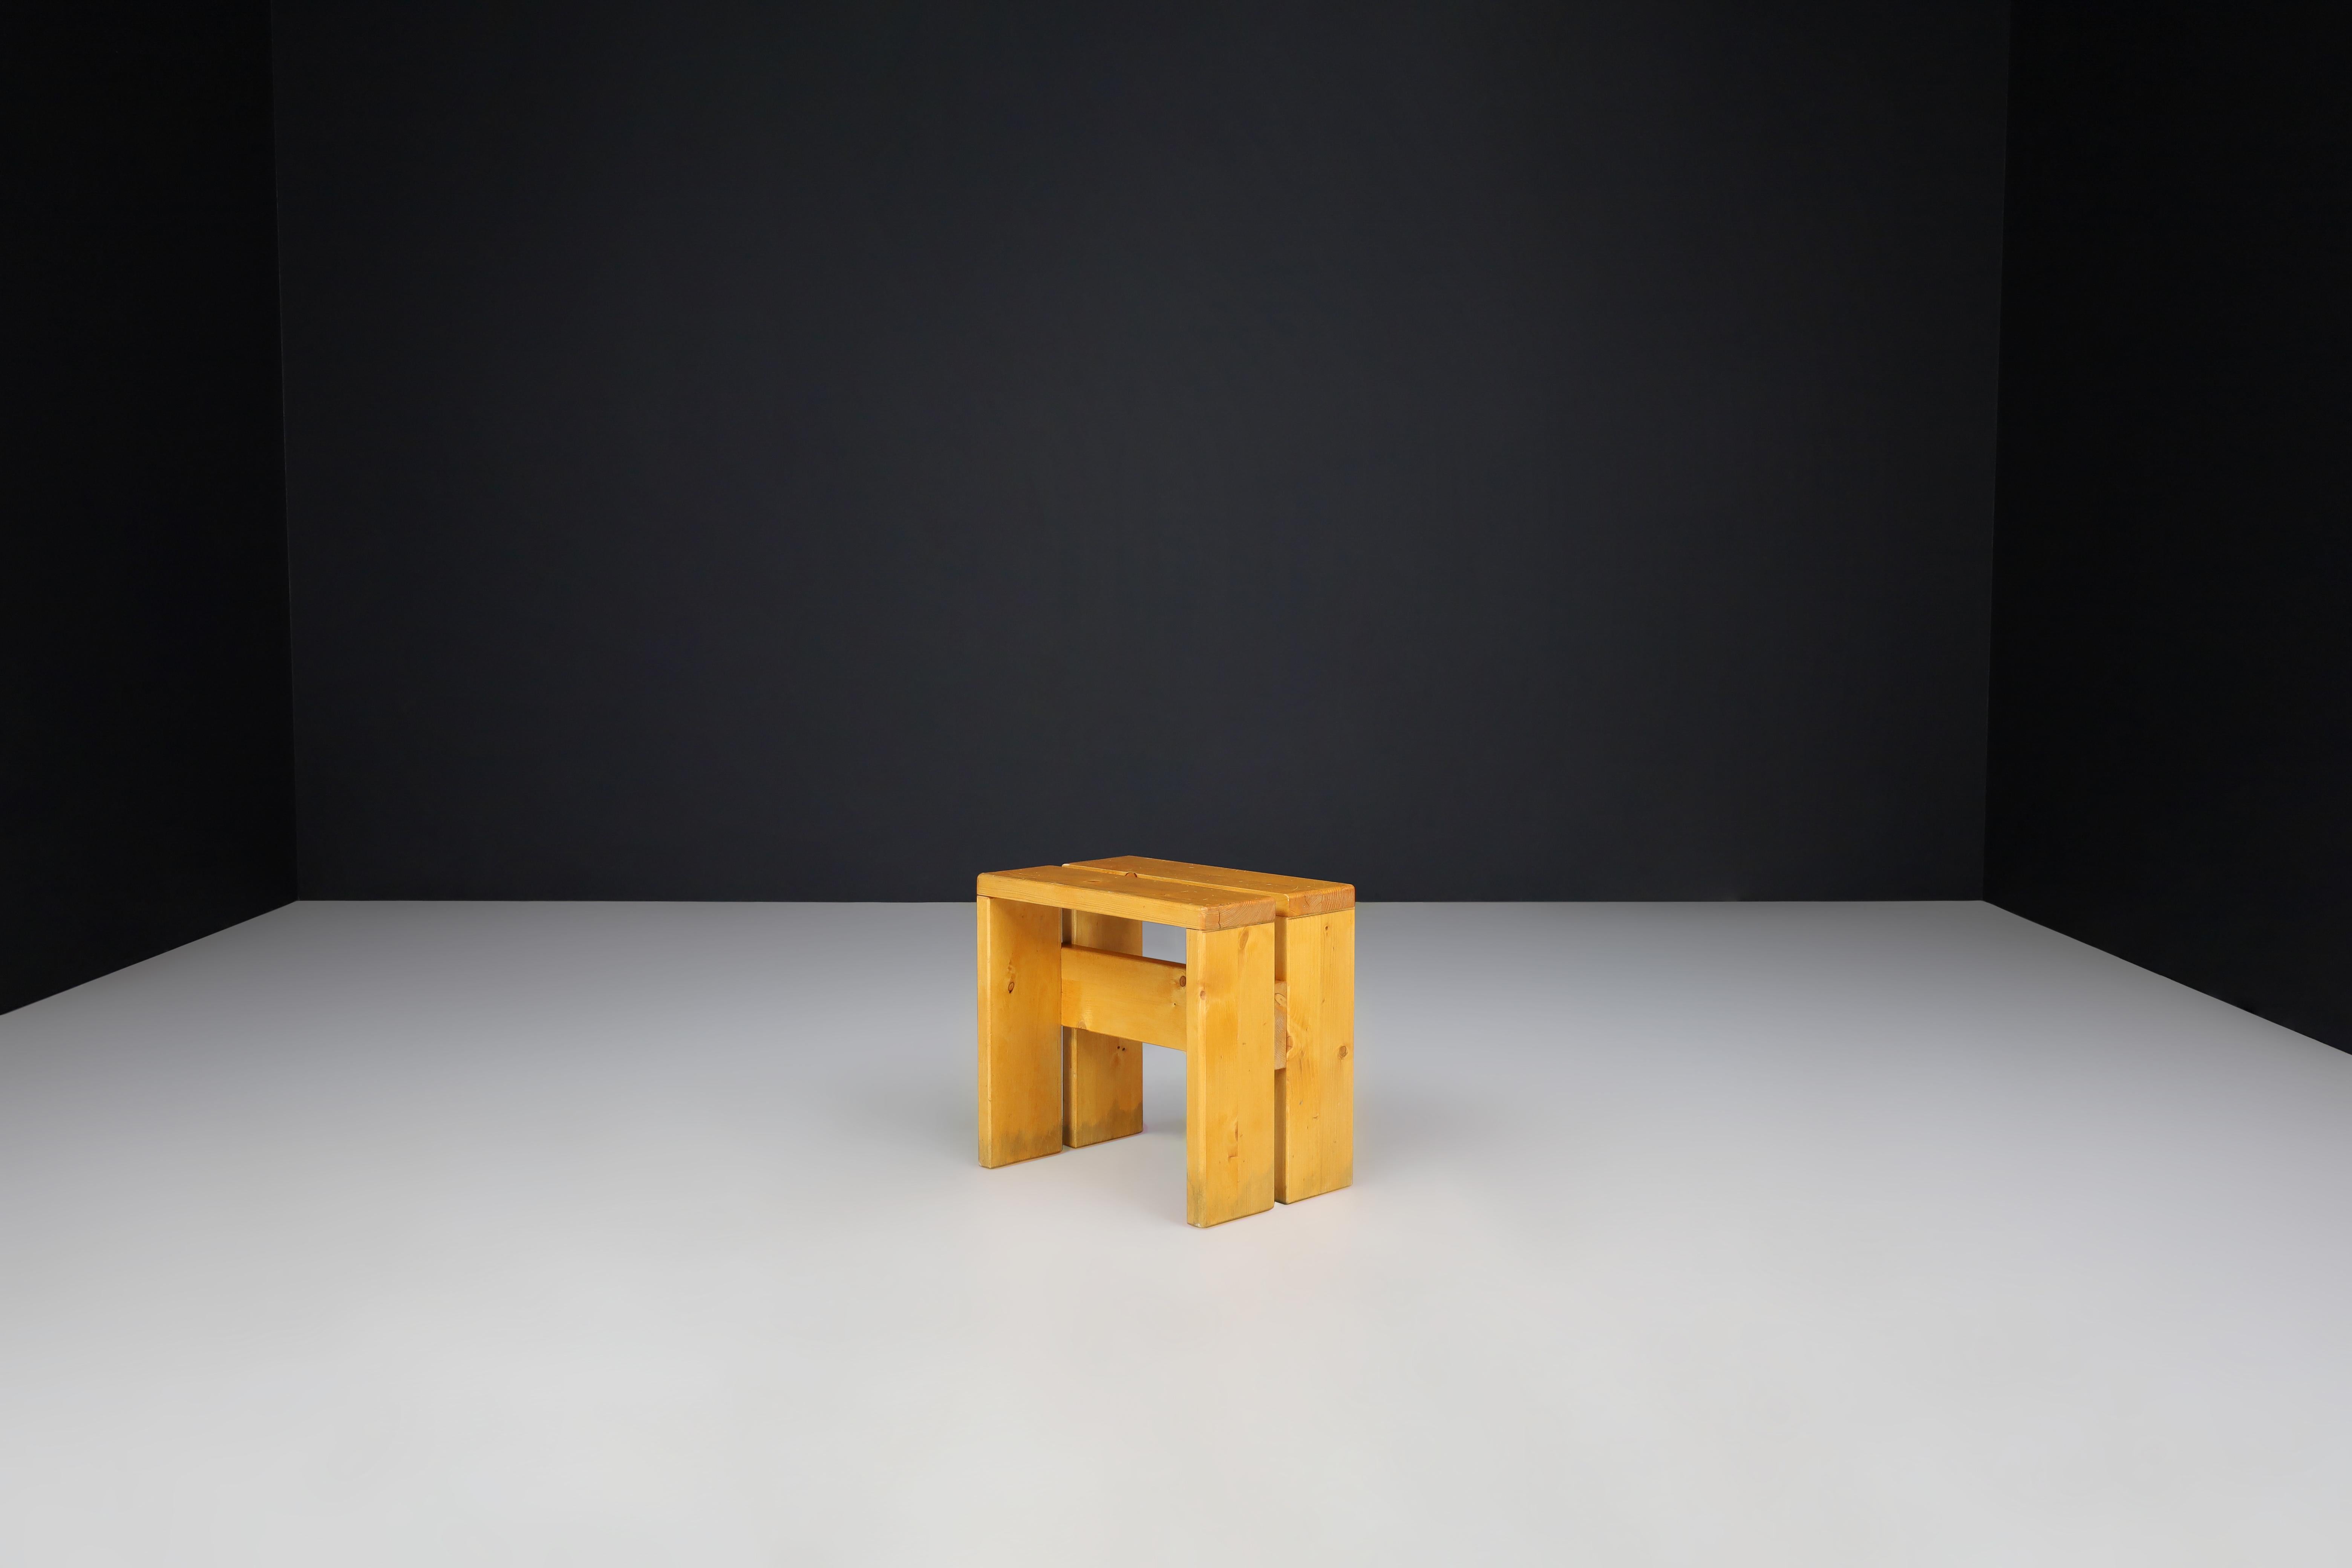 Pine Wood Charlotte Perriand Stool for Les Arcs, France, 1960s

This pine wood stool was designed by Charlotte Perriand for the Les Arcs ski resort in France around 1960. It is a simple and iconic design, with clean lines typical of Perriand's work.